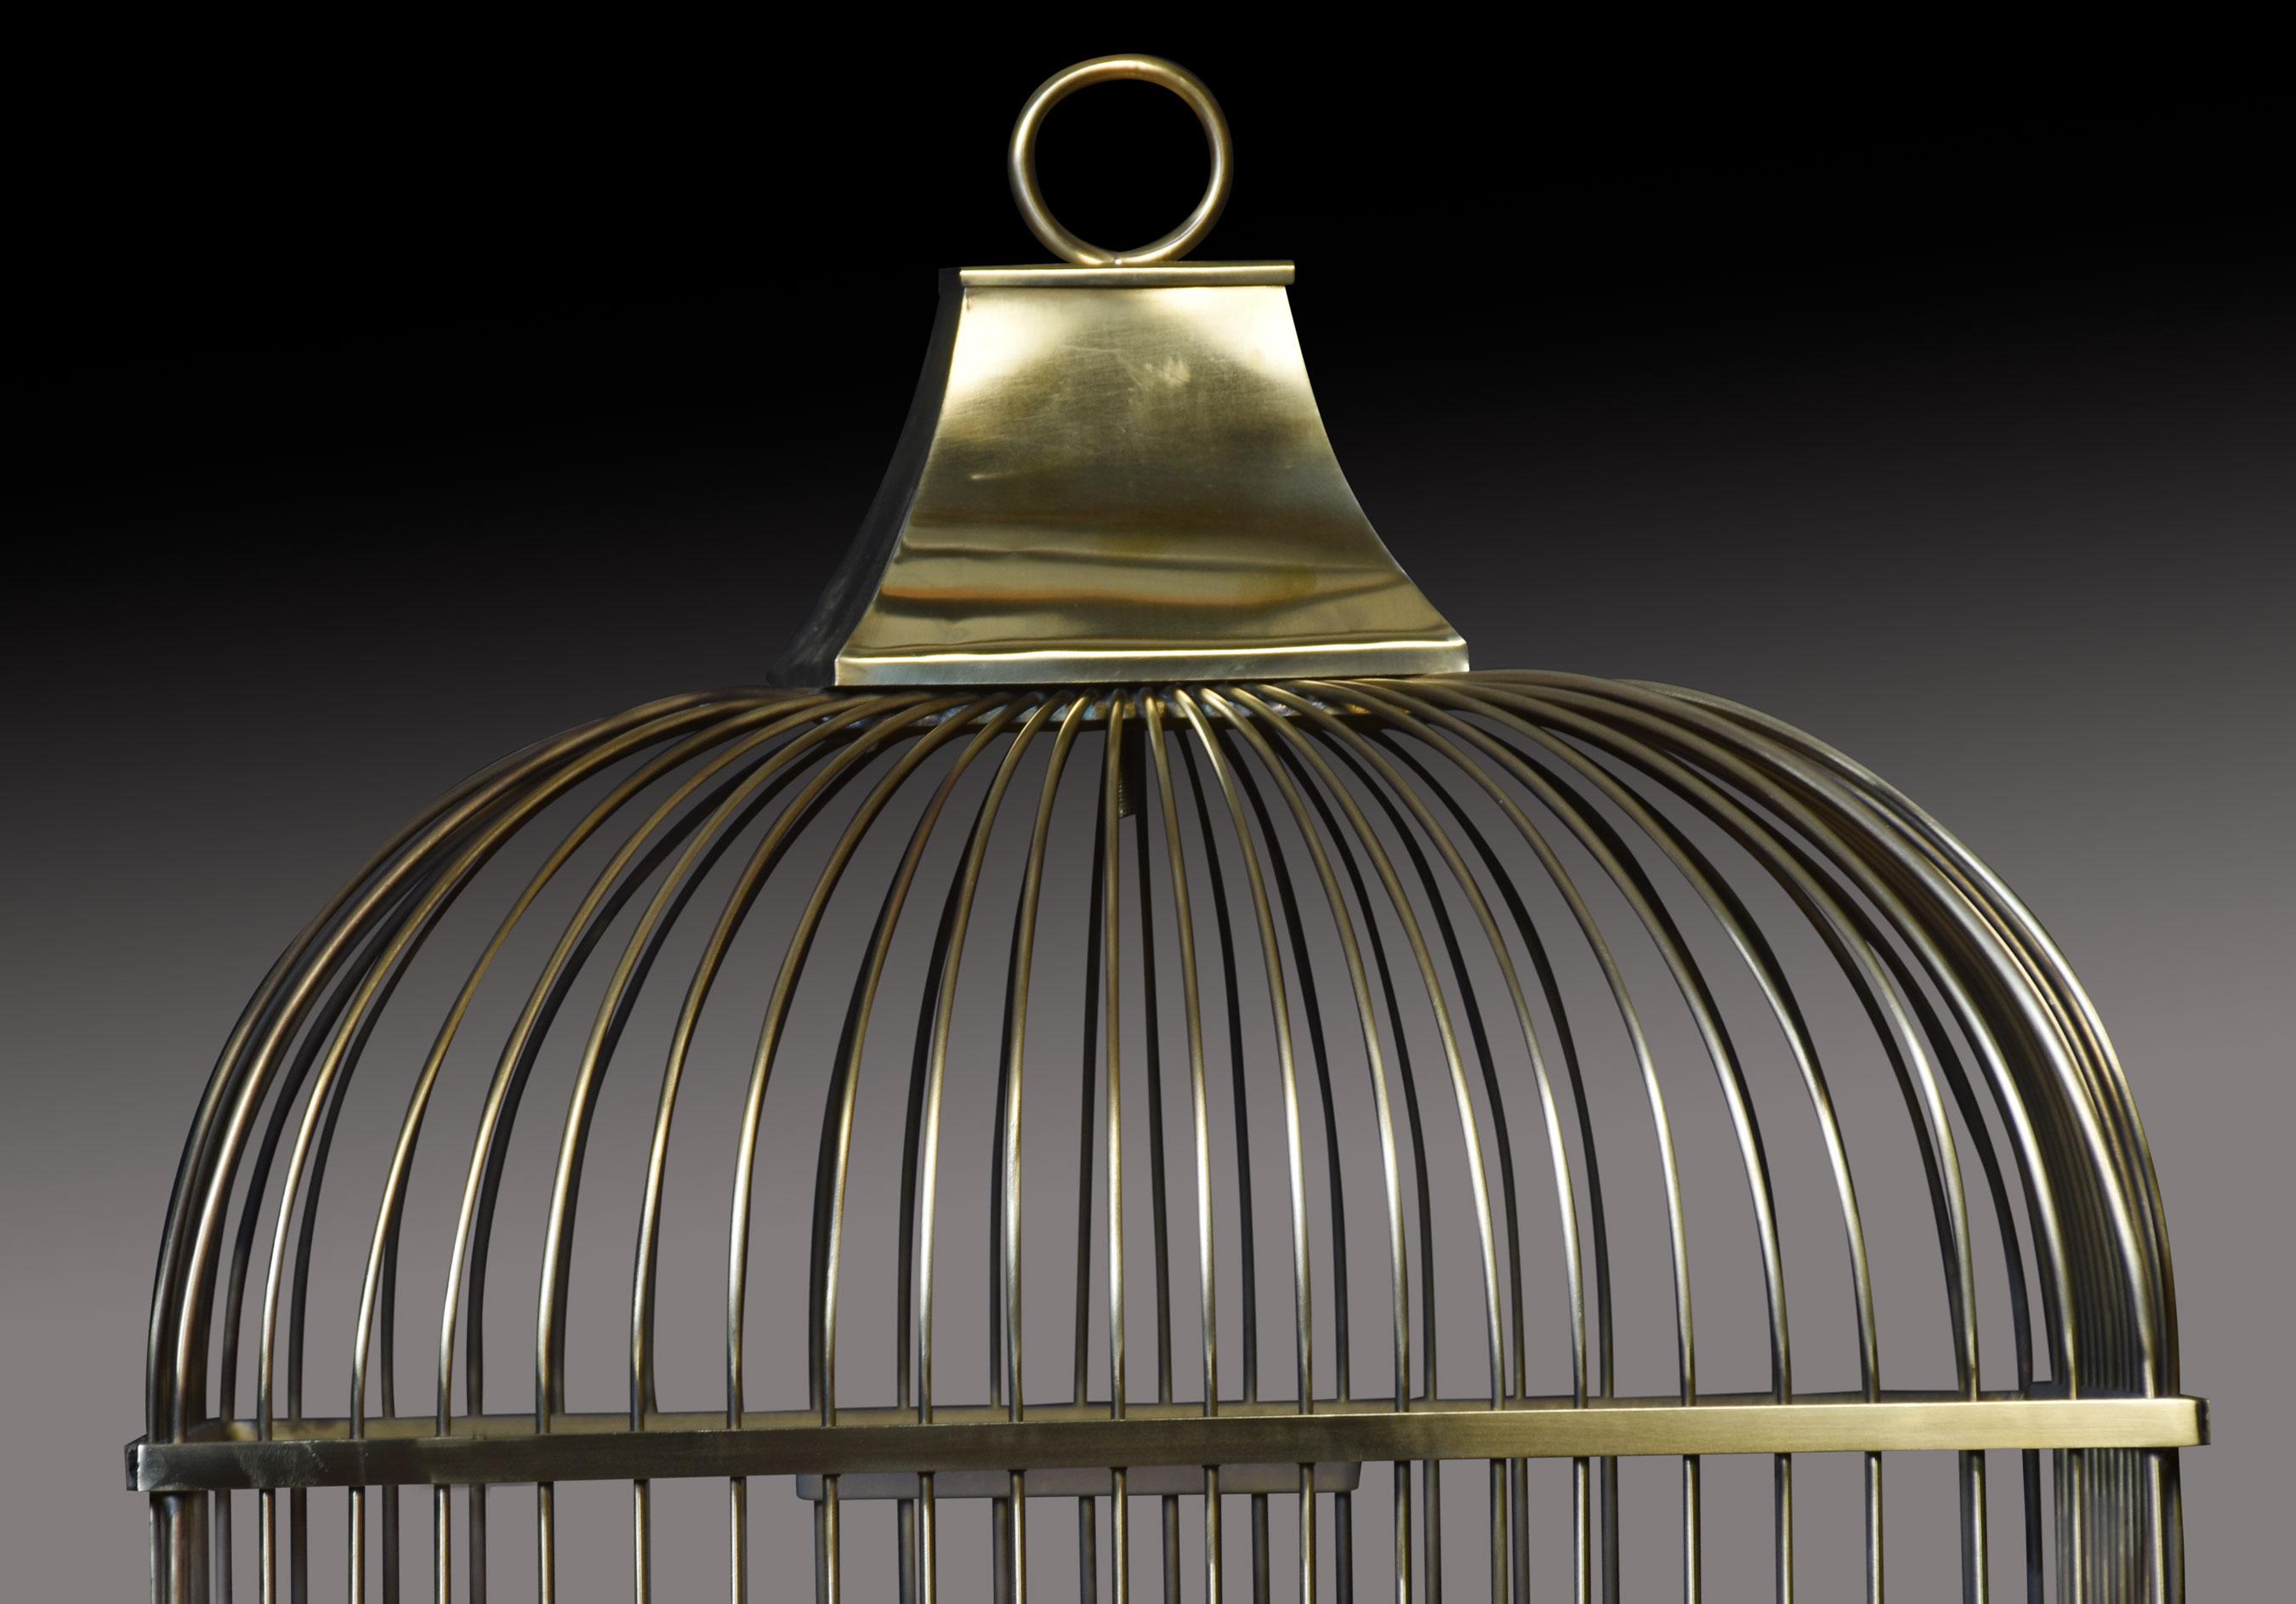 19th-century birdcage of rectangular form, having brass wirework top with original feeders and solid brass base.
Dimensions
Height 27.5 Inches
Width 19 Inches
Depth 14 Inches